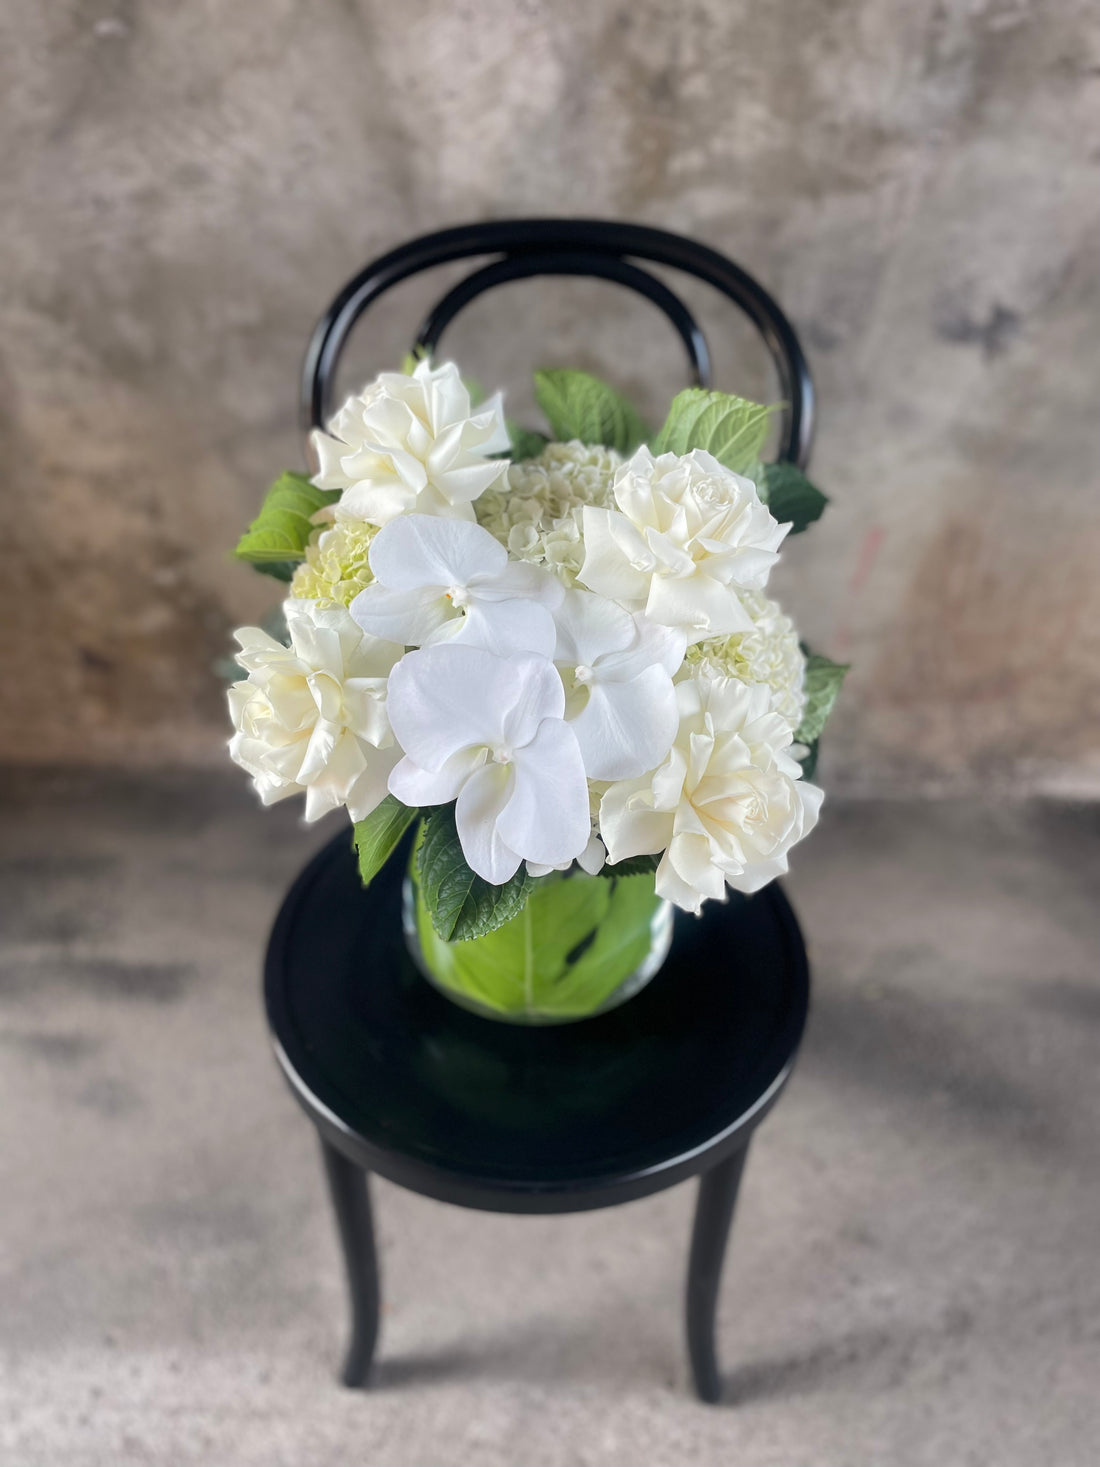 White and green flowers displayed in a glass tapered vase, sitting on a black bentwood chair with a concrete wall background.